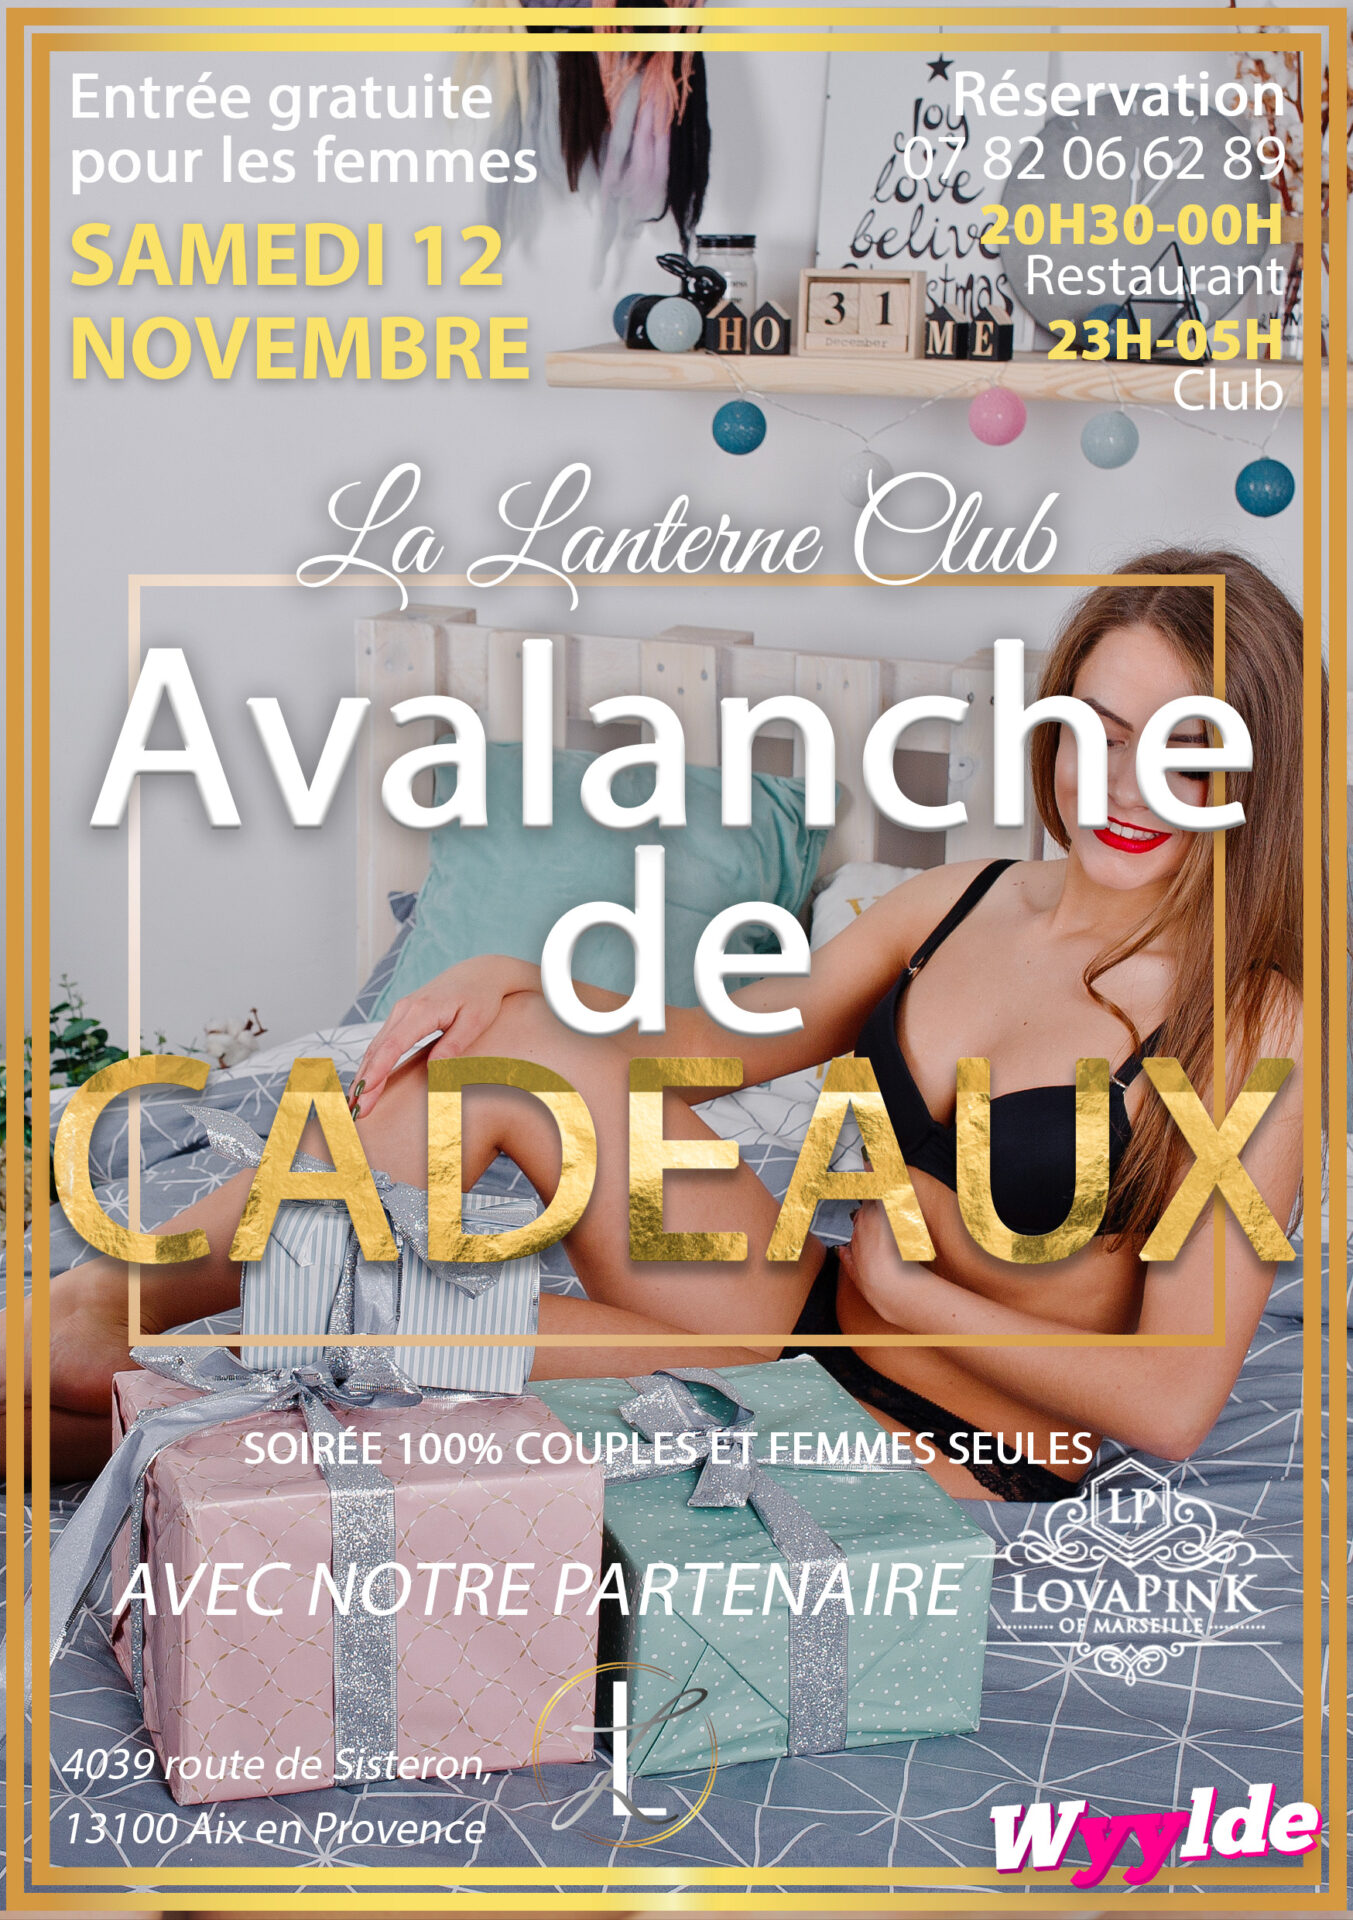 avalanche-of-gifts-couples-and-lonely-women-party-saturday-12-november